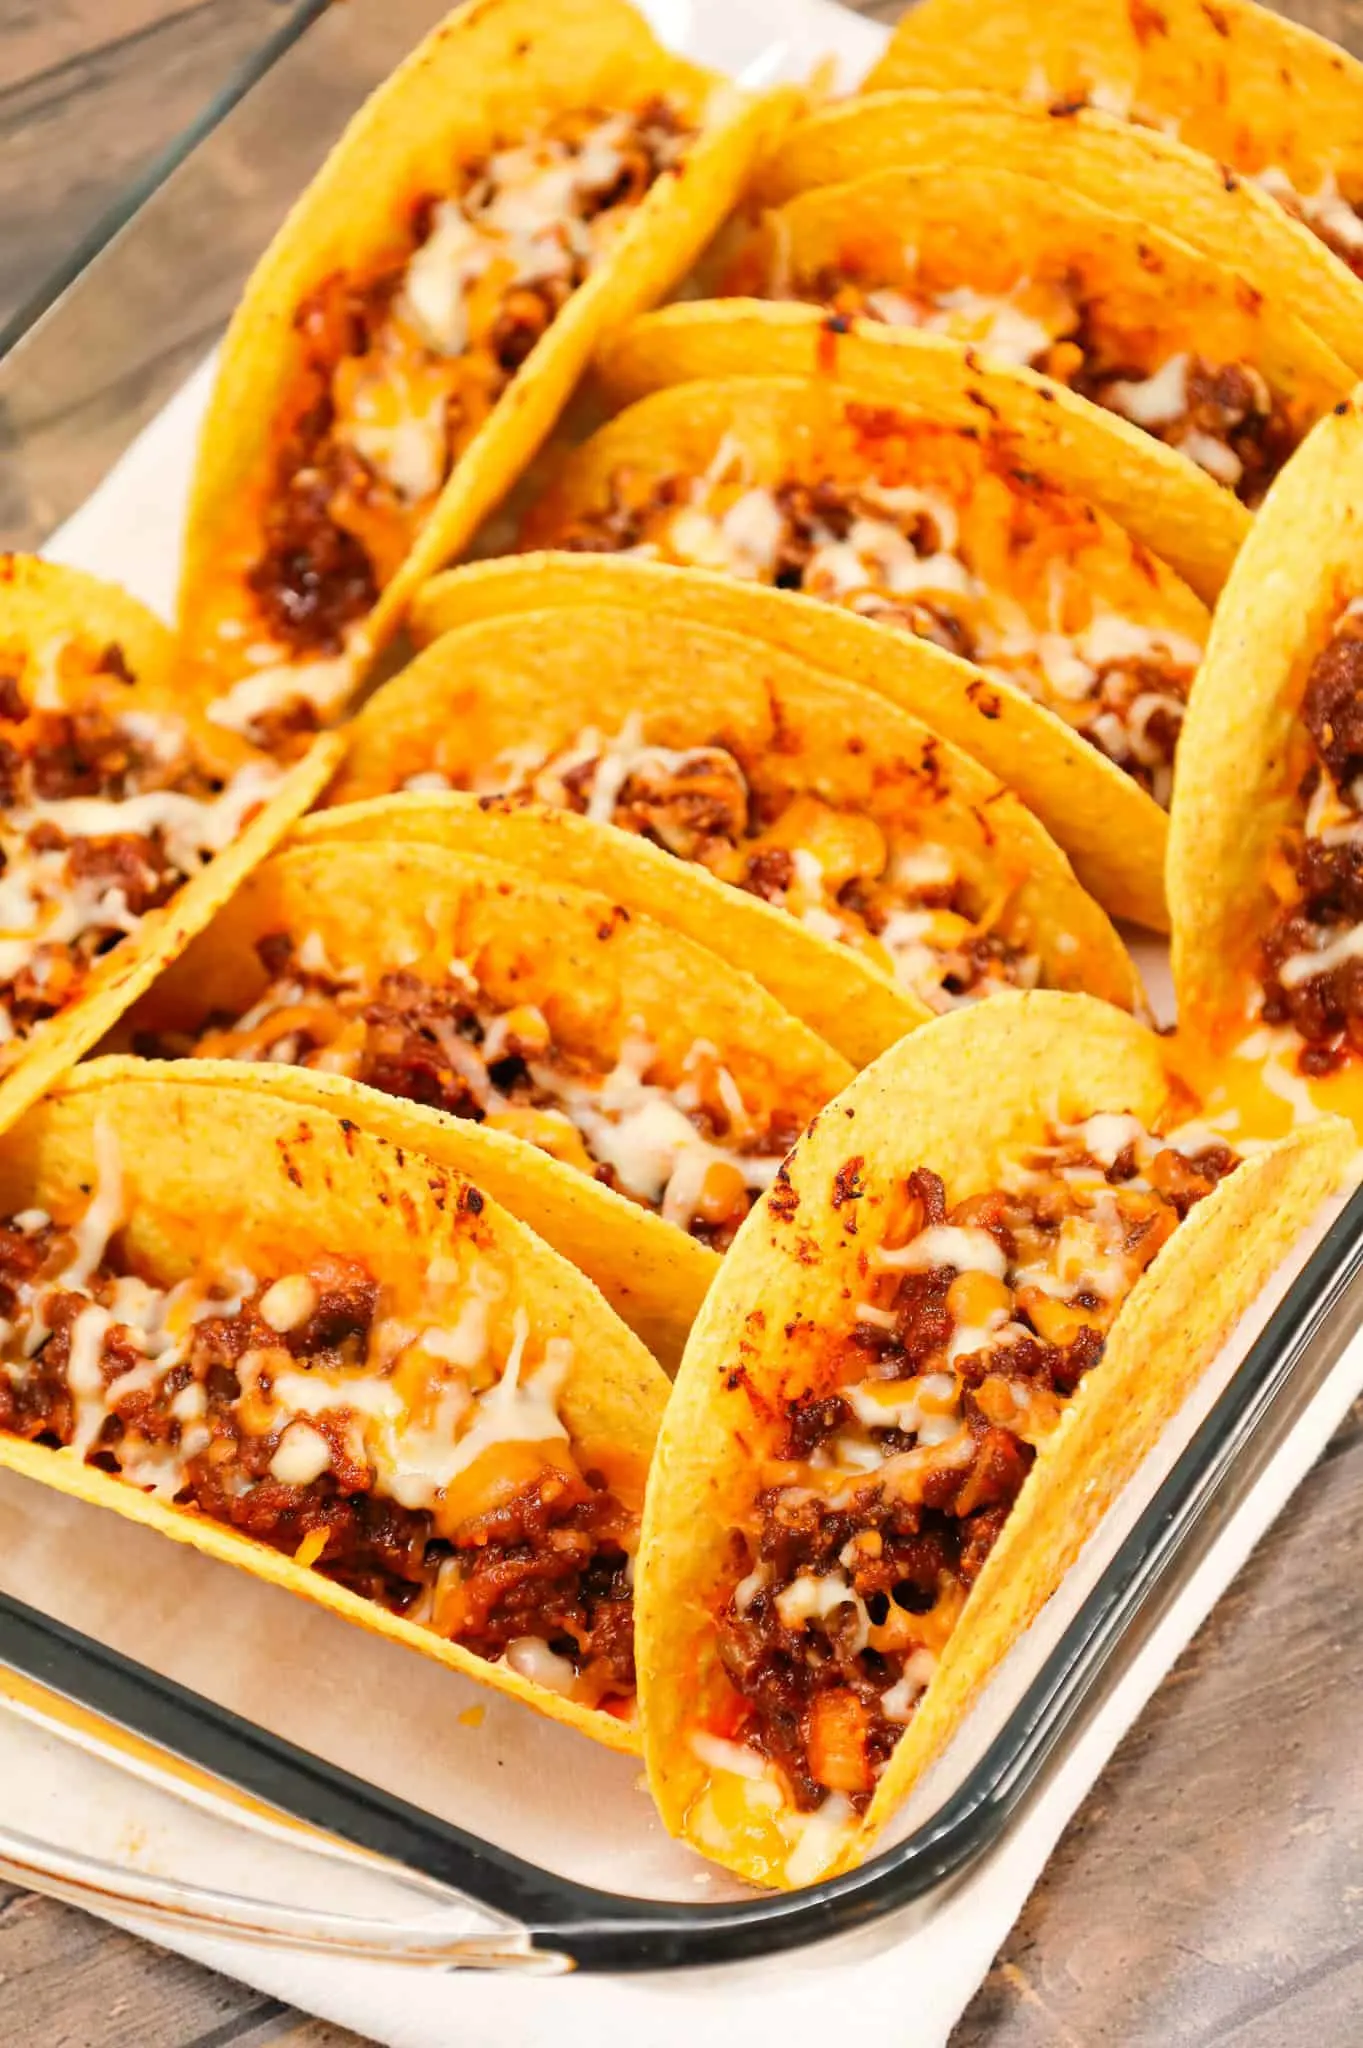 Sloppy Joe Tacos are hearty ground beef tacos with sloppy joe sauce and baked with cheese.